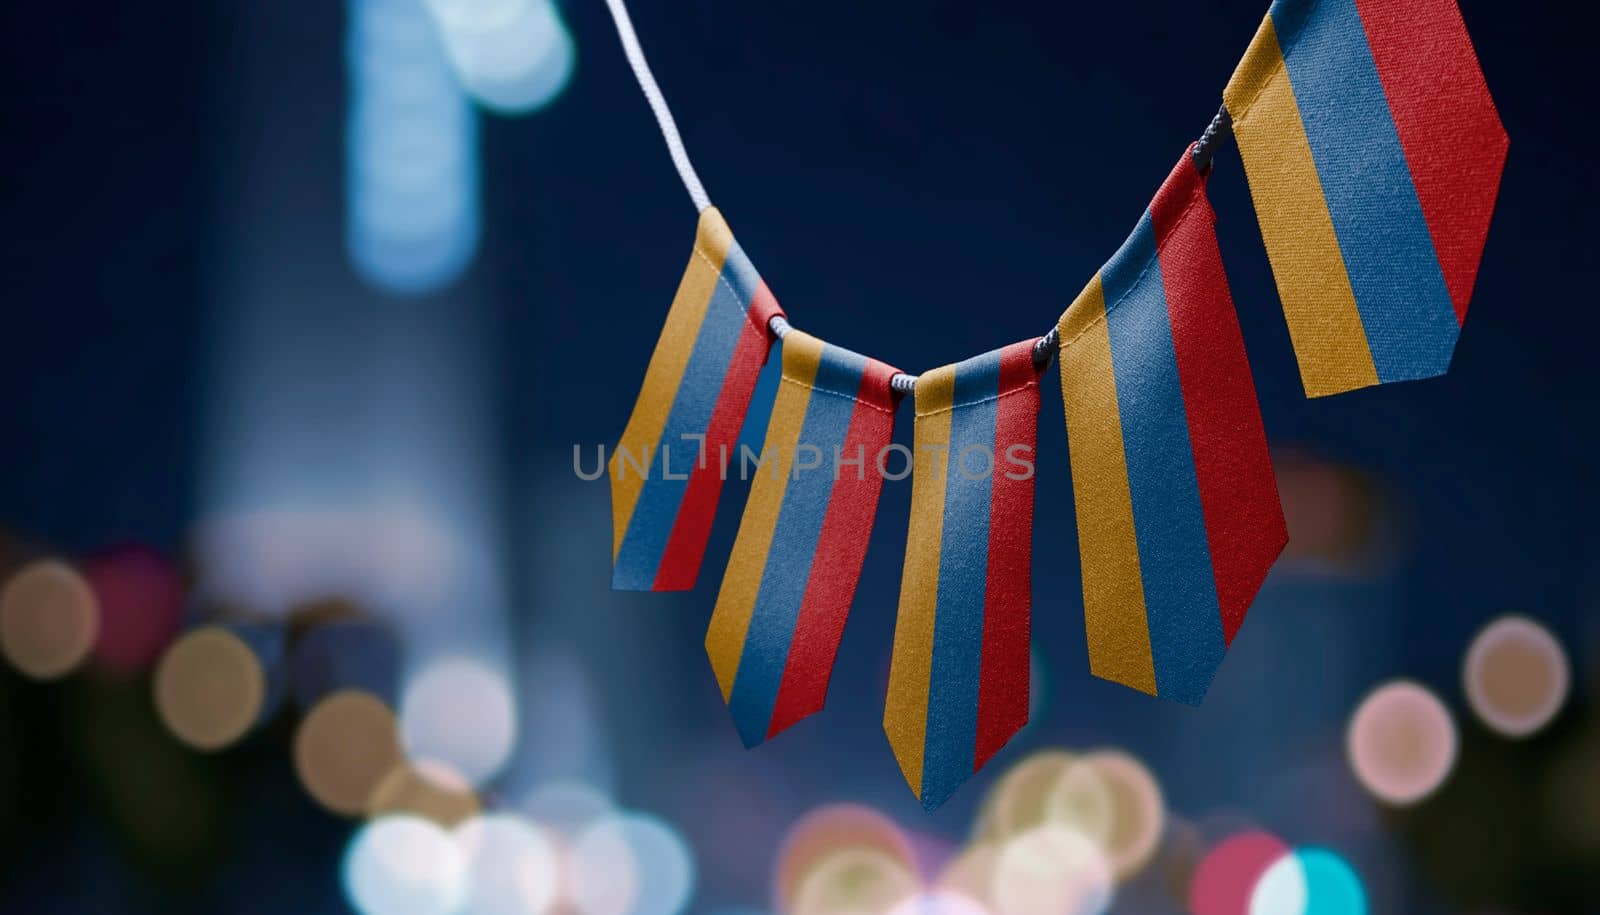 A garland of Armenia national flags on an abstract blurred background.